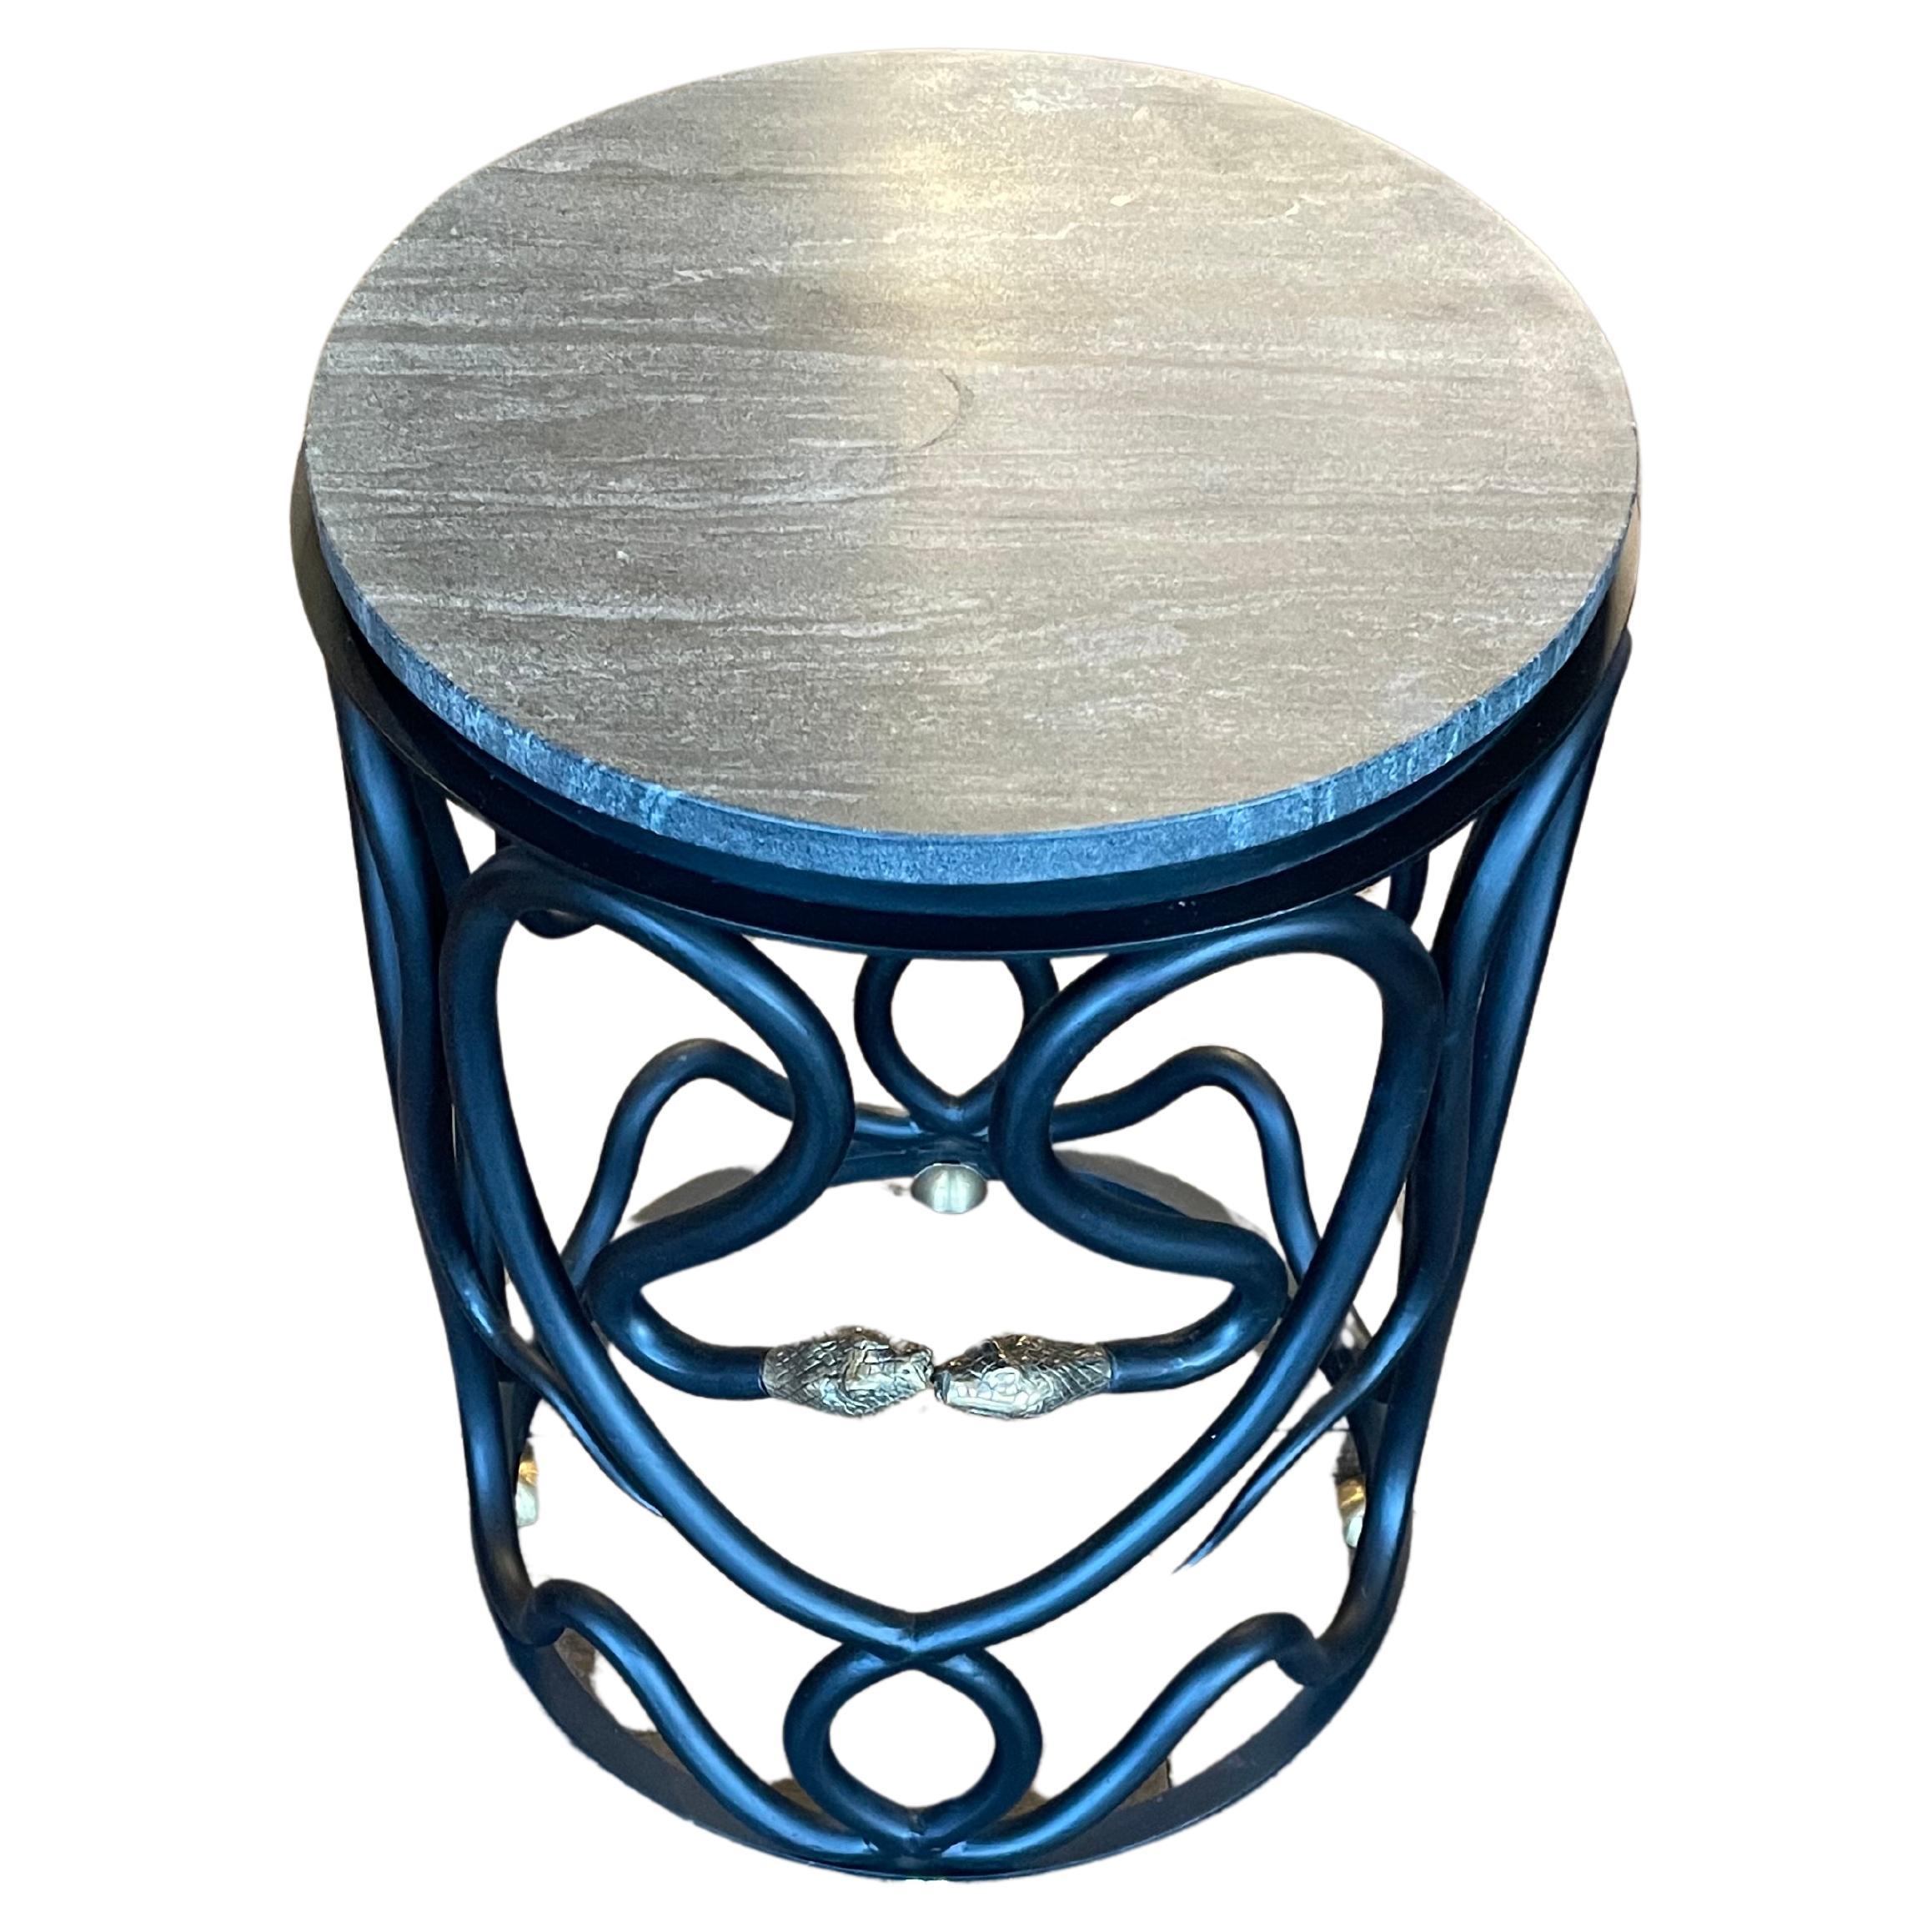 Serpentine Cement-Top End Table by Paul Marra